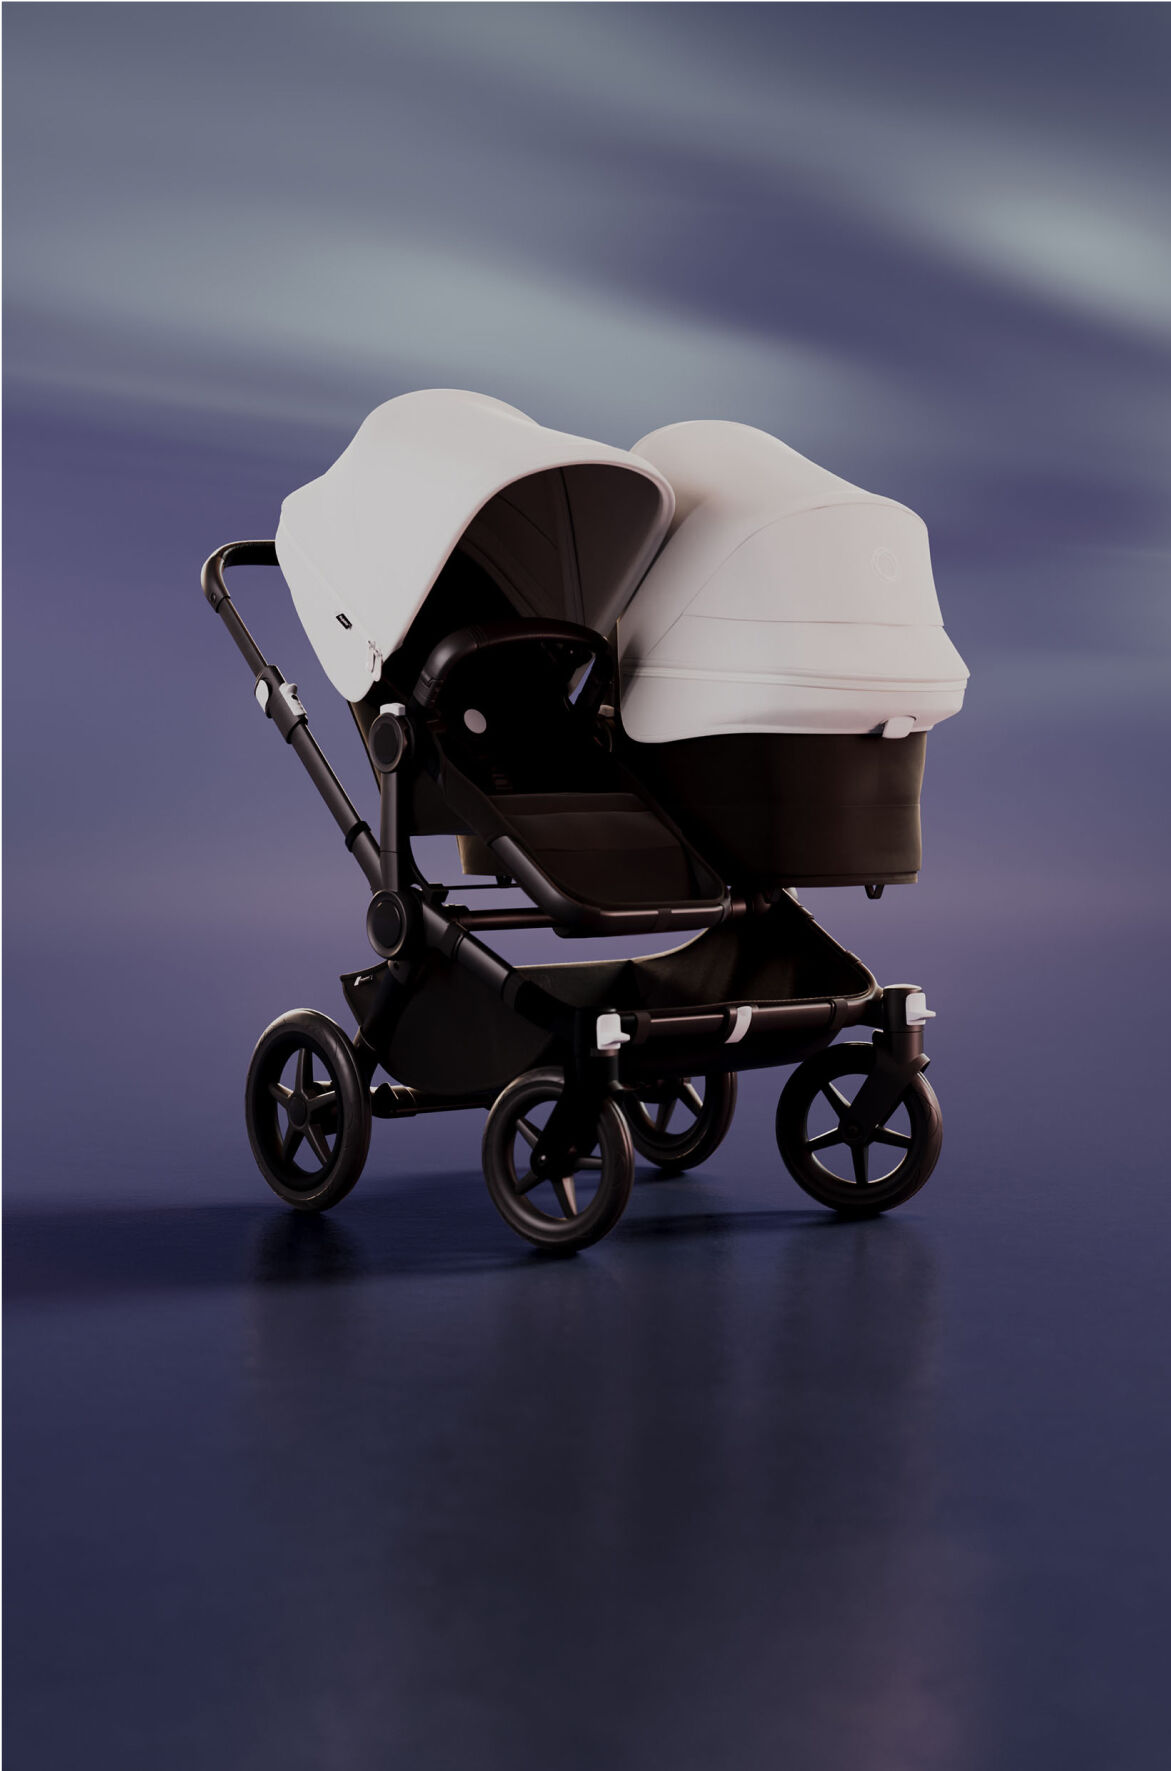 A Bugaboo Donkey 5 Duo pushchair with a seat and a bassinet. The sun canopy is in Misty White. The background is blue with streaks of white.